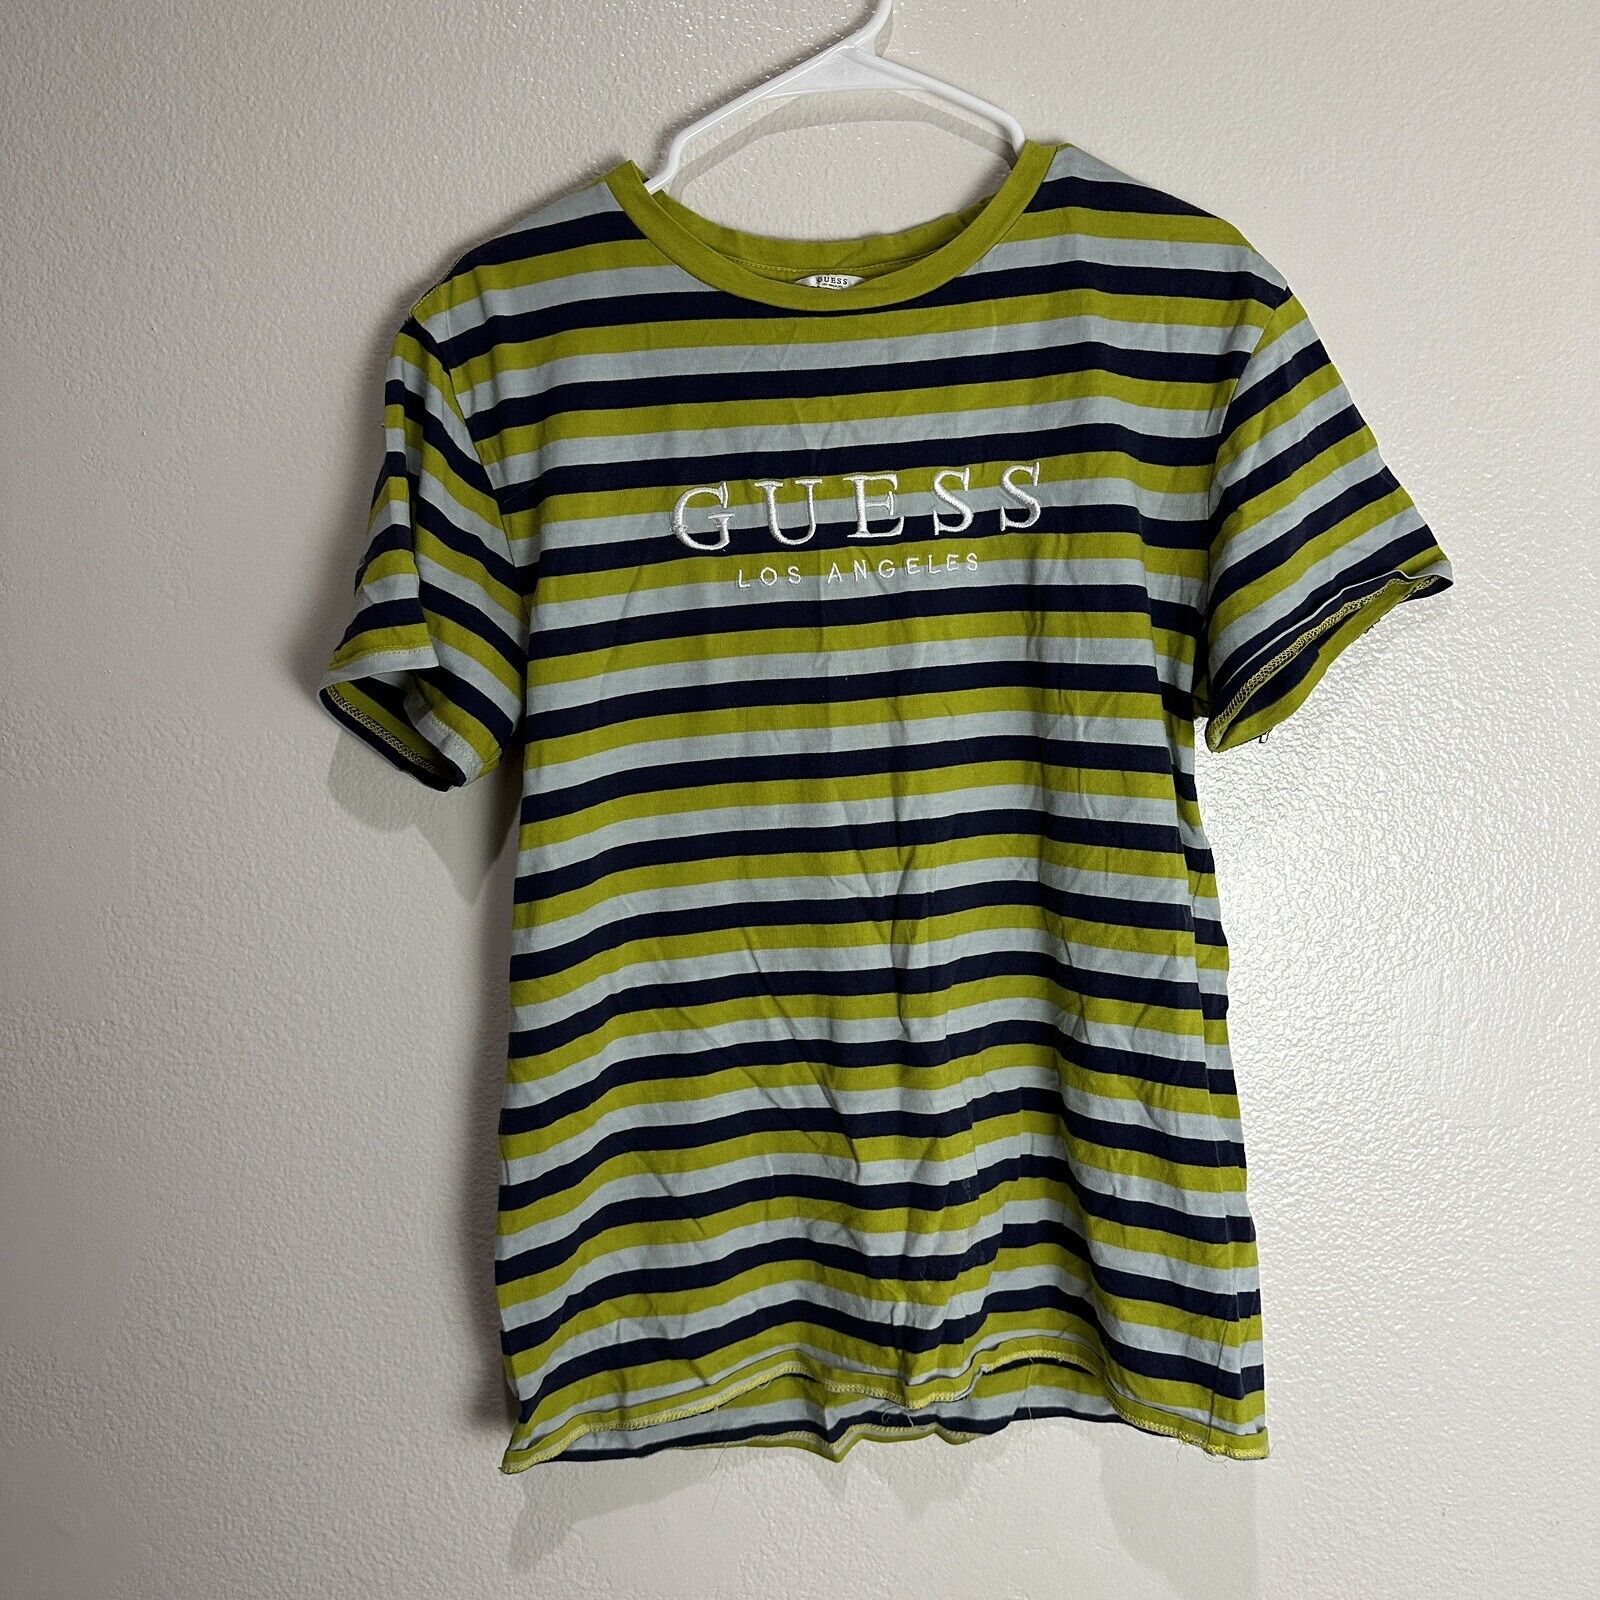 Guess Vintage Striped Shirt Size Small